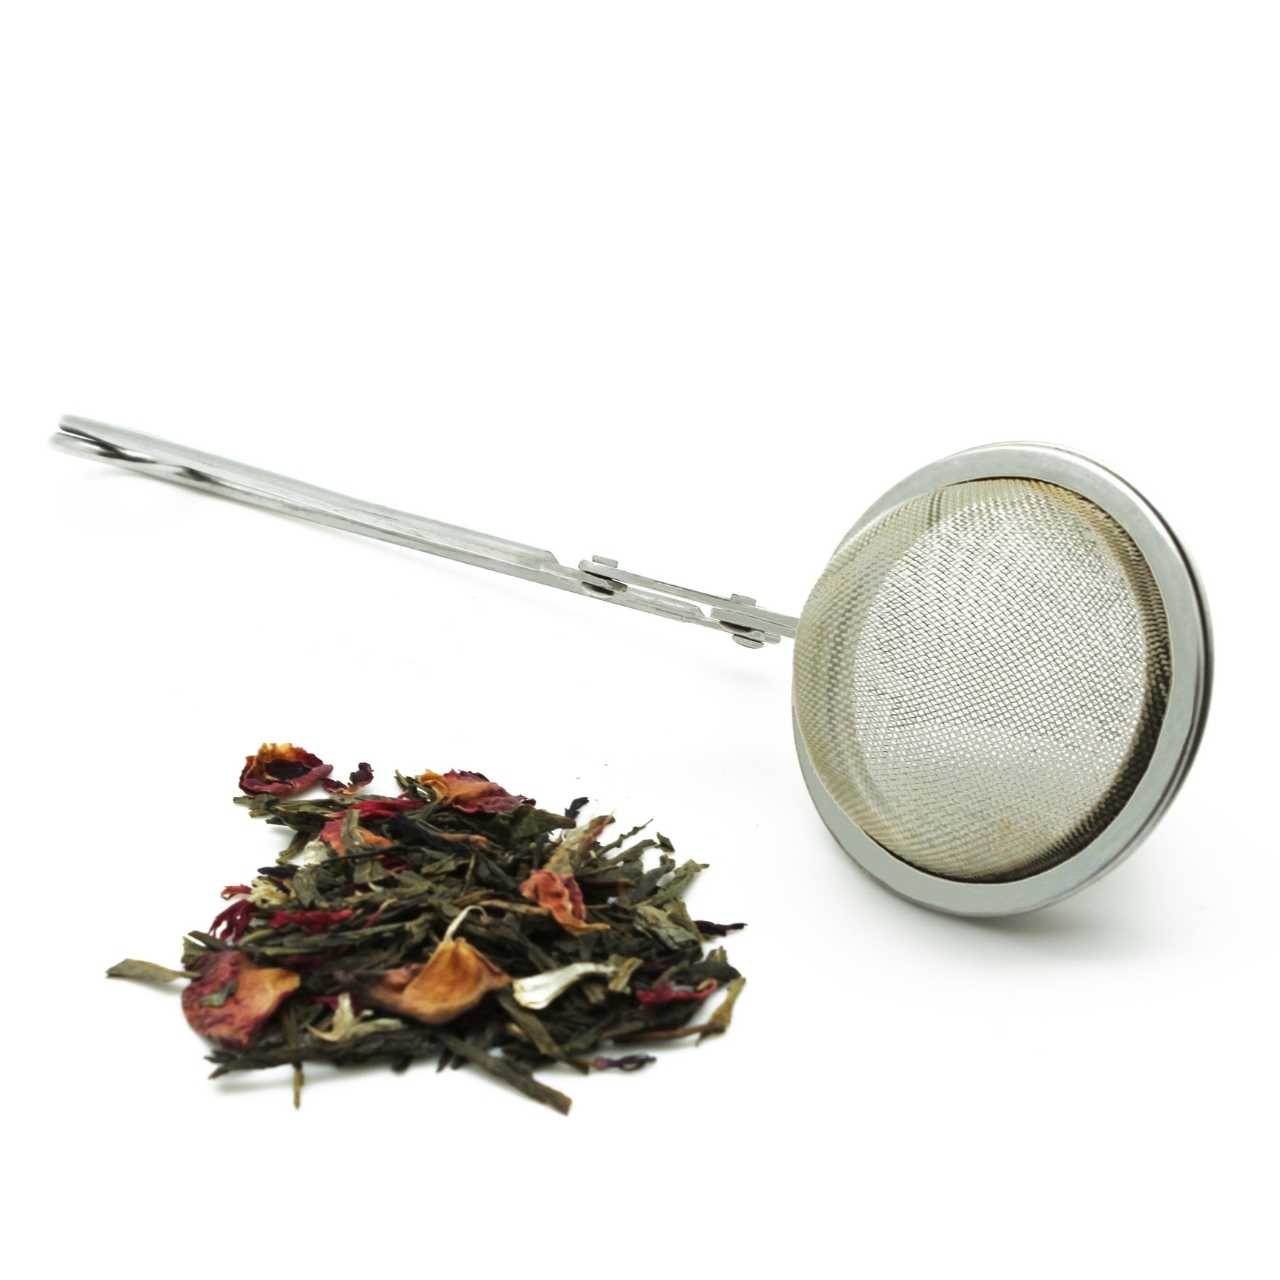 Ball Infuser For Loose Leaf Tea with some fruity and green tea